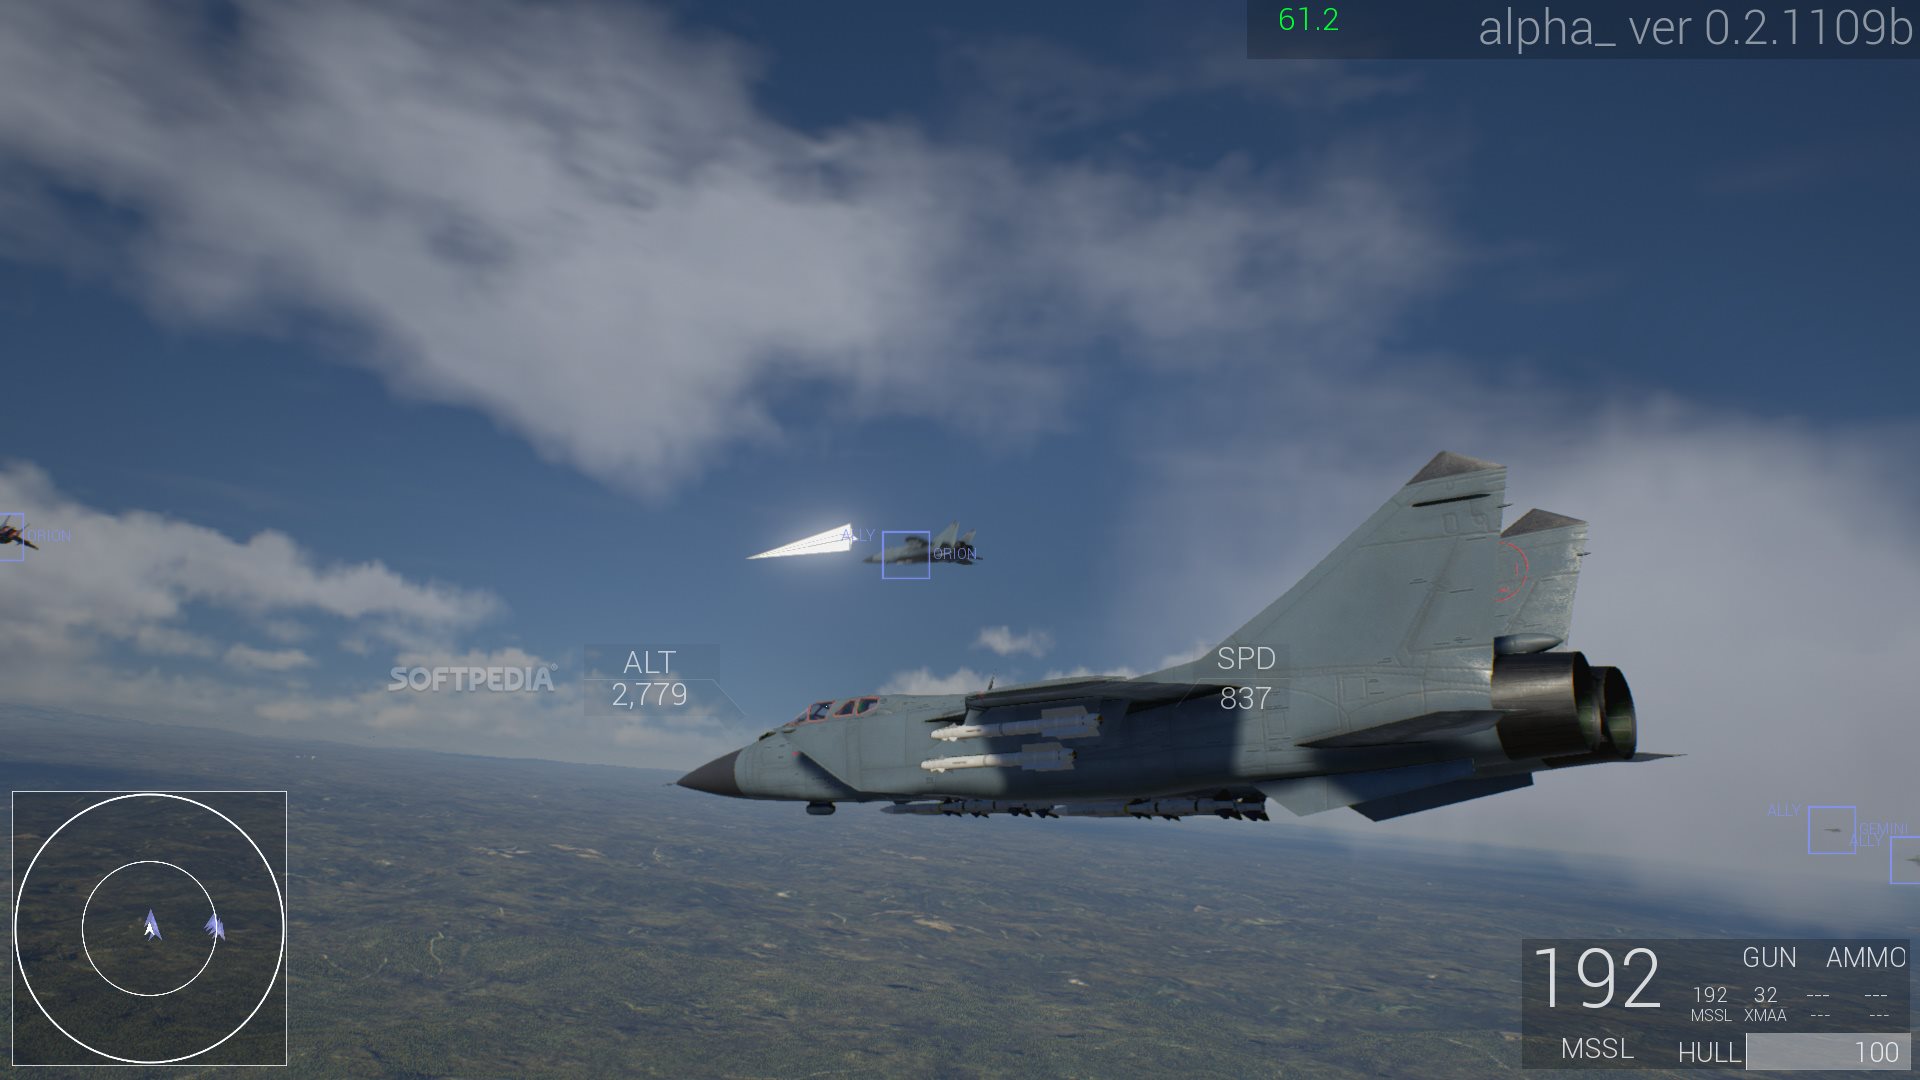 project wingman sector d2 download free